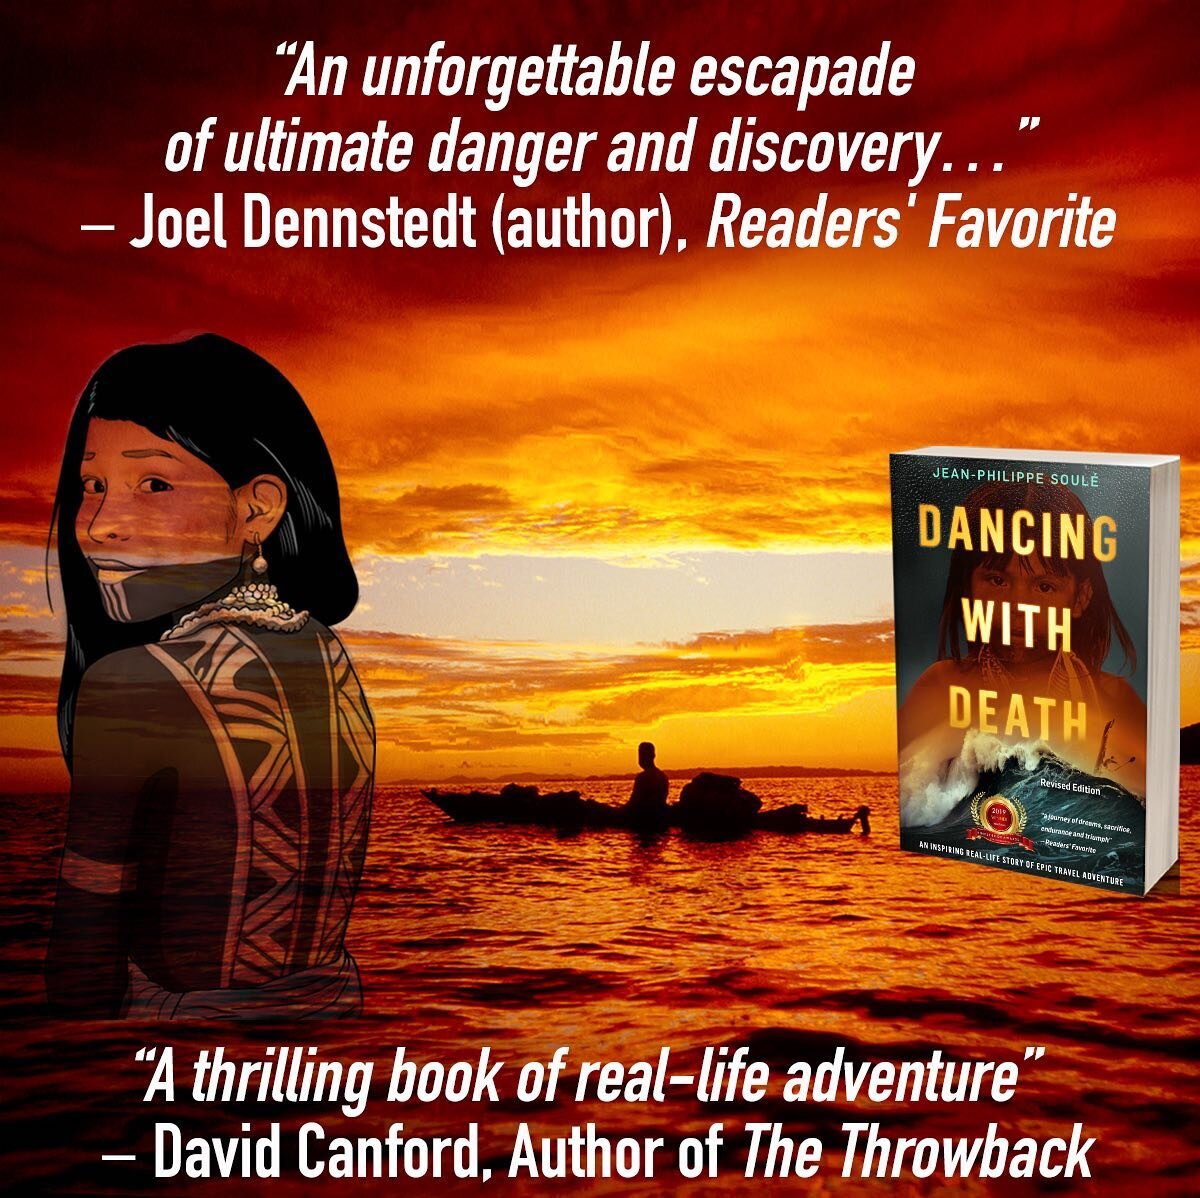 &ldquo;An unforgettable escapade of ultimate danger and discovery&hellip;&rdquo;
&mdash; Joel Dennstedt (author), Readers' Favorite

&ldquo;A thrilling book of real-life adventure&rdquo; 
- David Canford, Author of The Throwback

A tale of adventure,